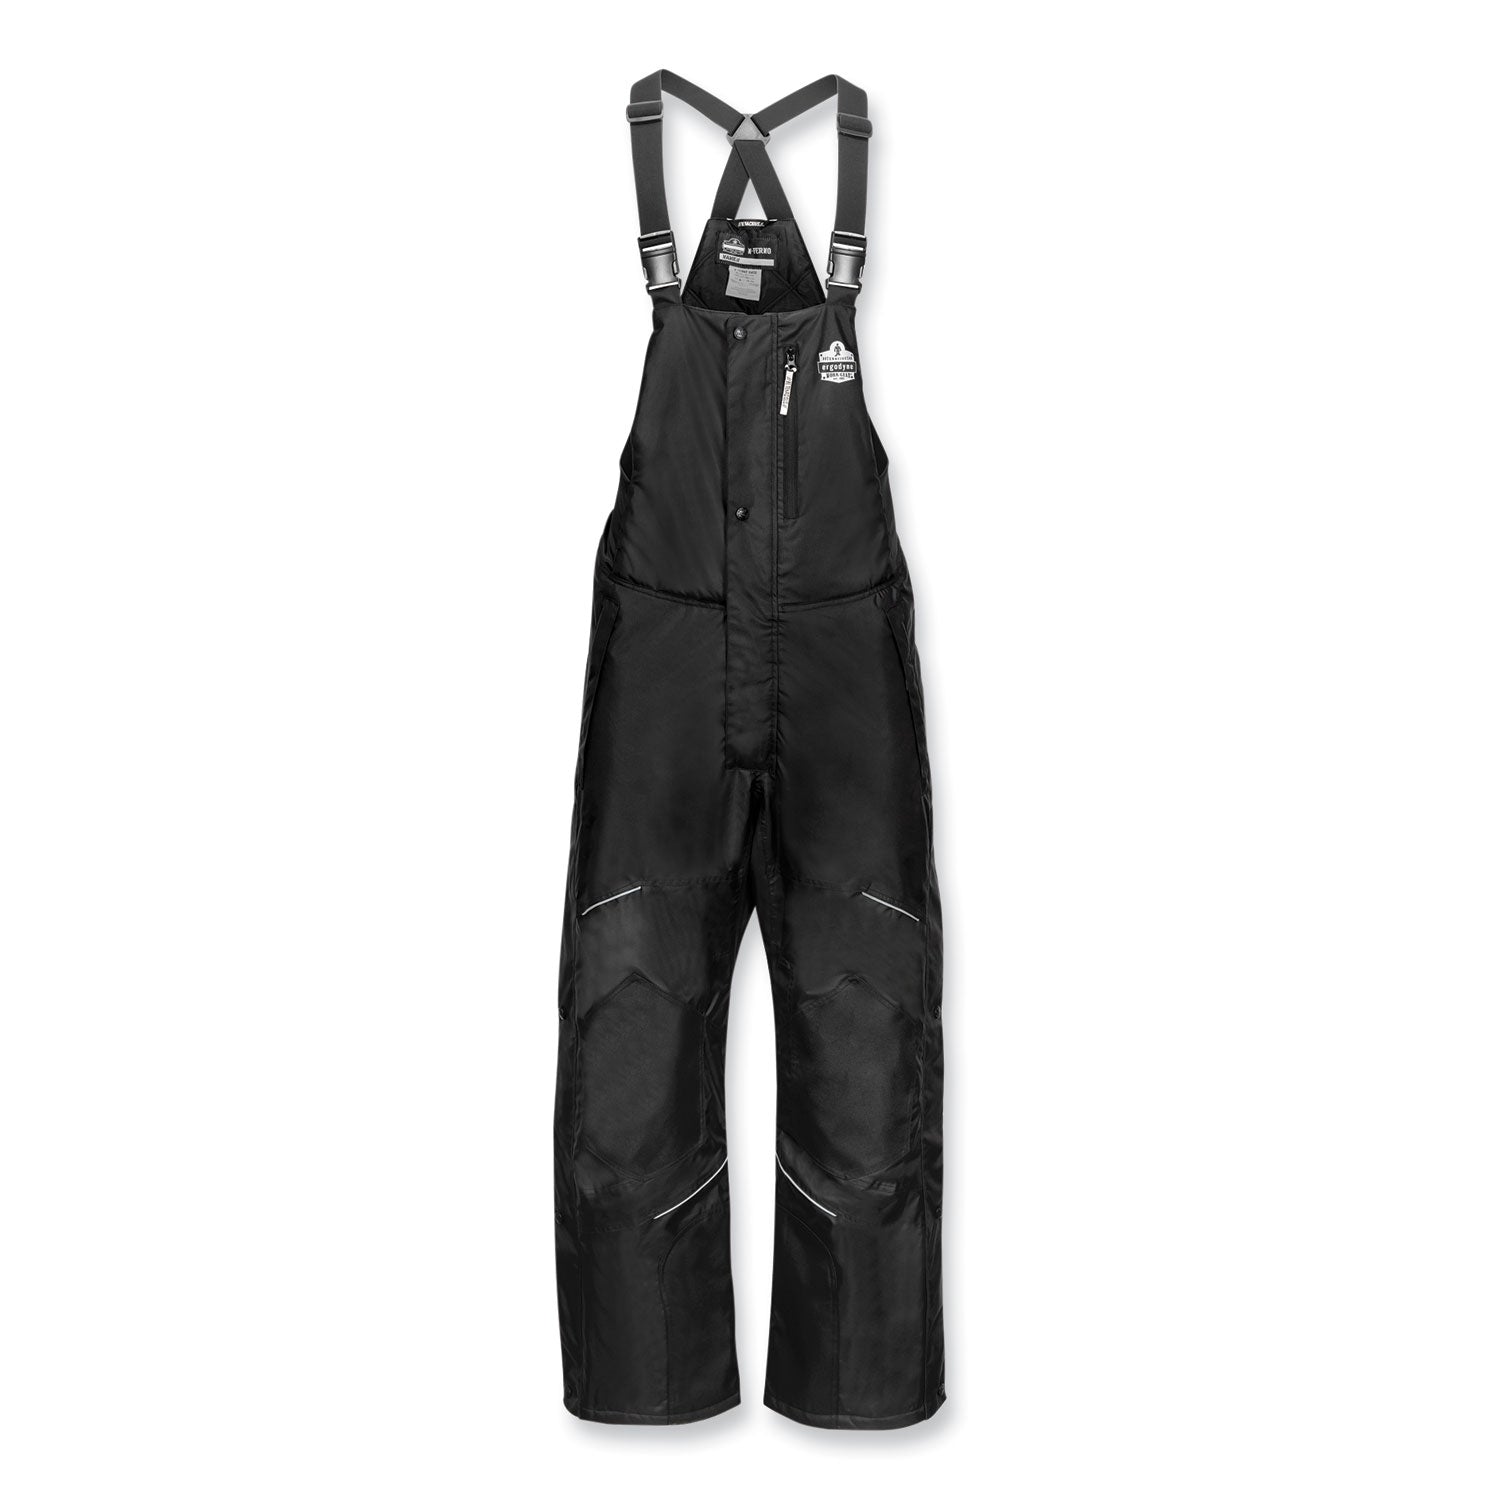 n-ferno-6472-thermal-bib-with-300d-oxford-shell-3x-large-black-ships-in-1-3-business-days_ego41227 - 1